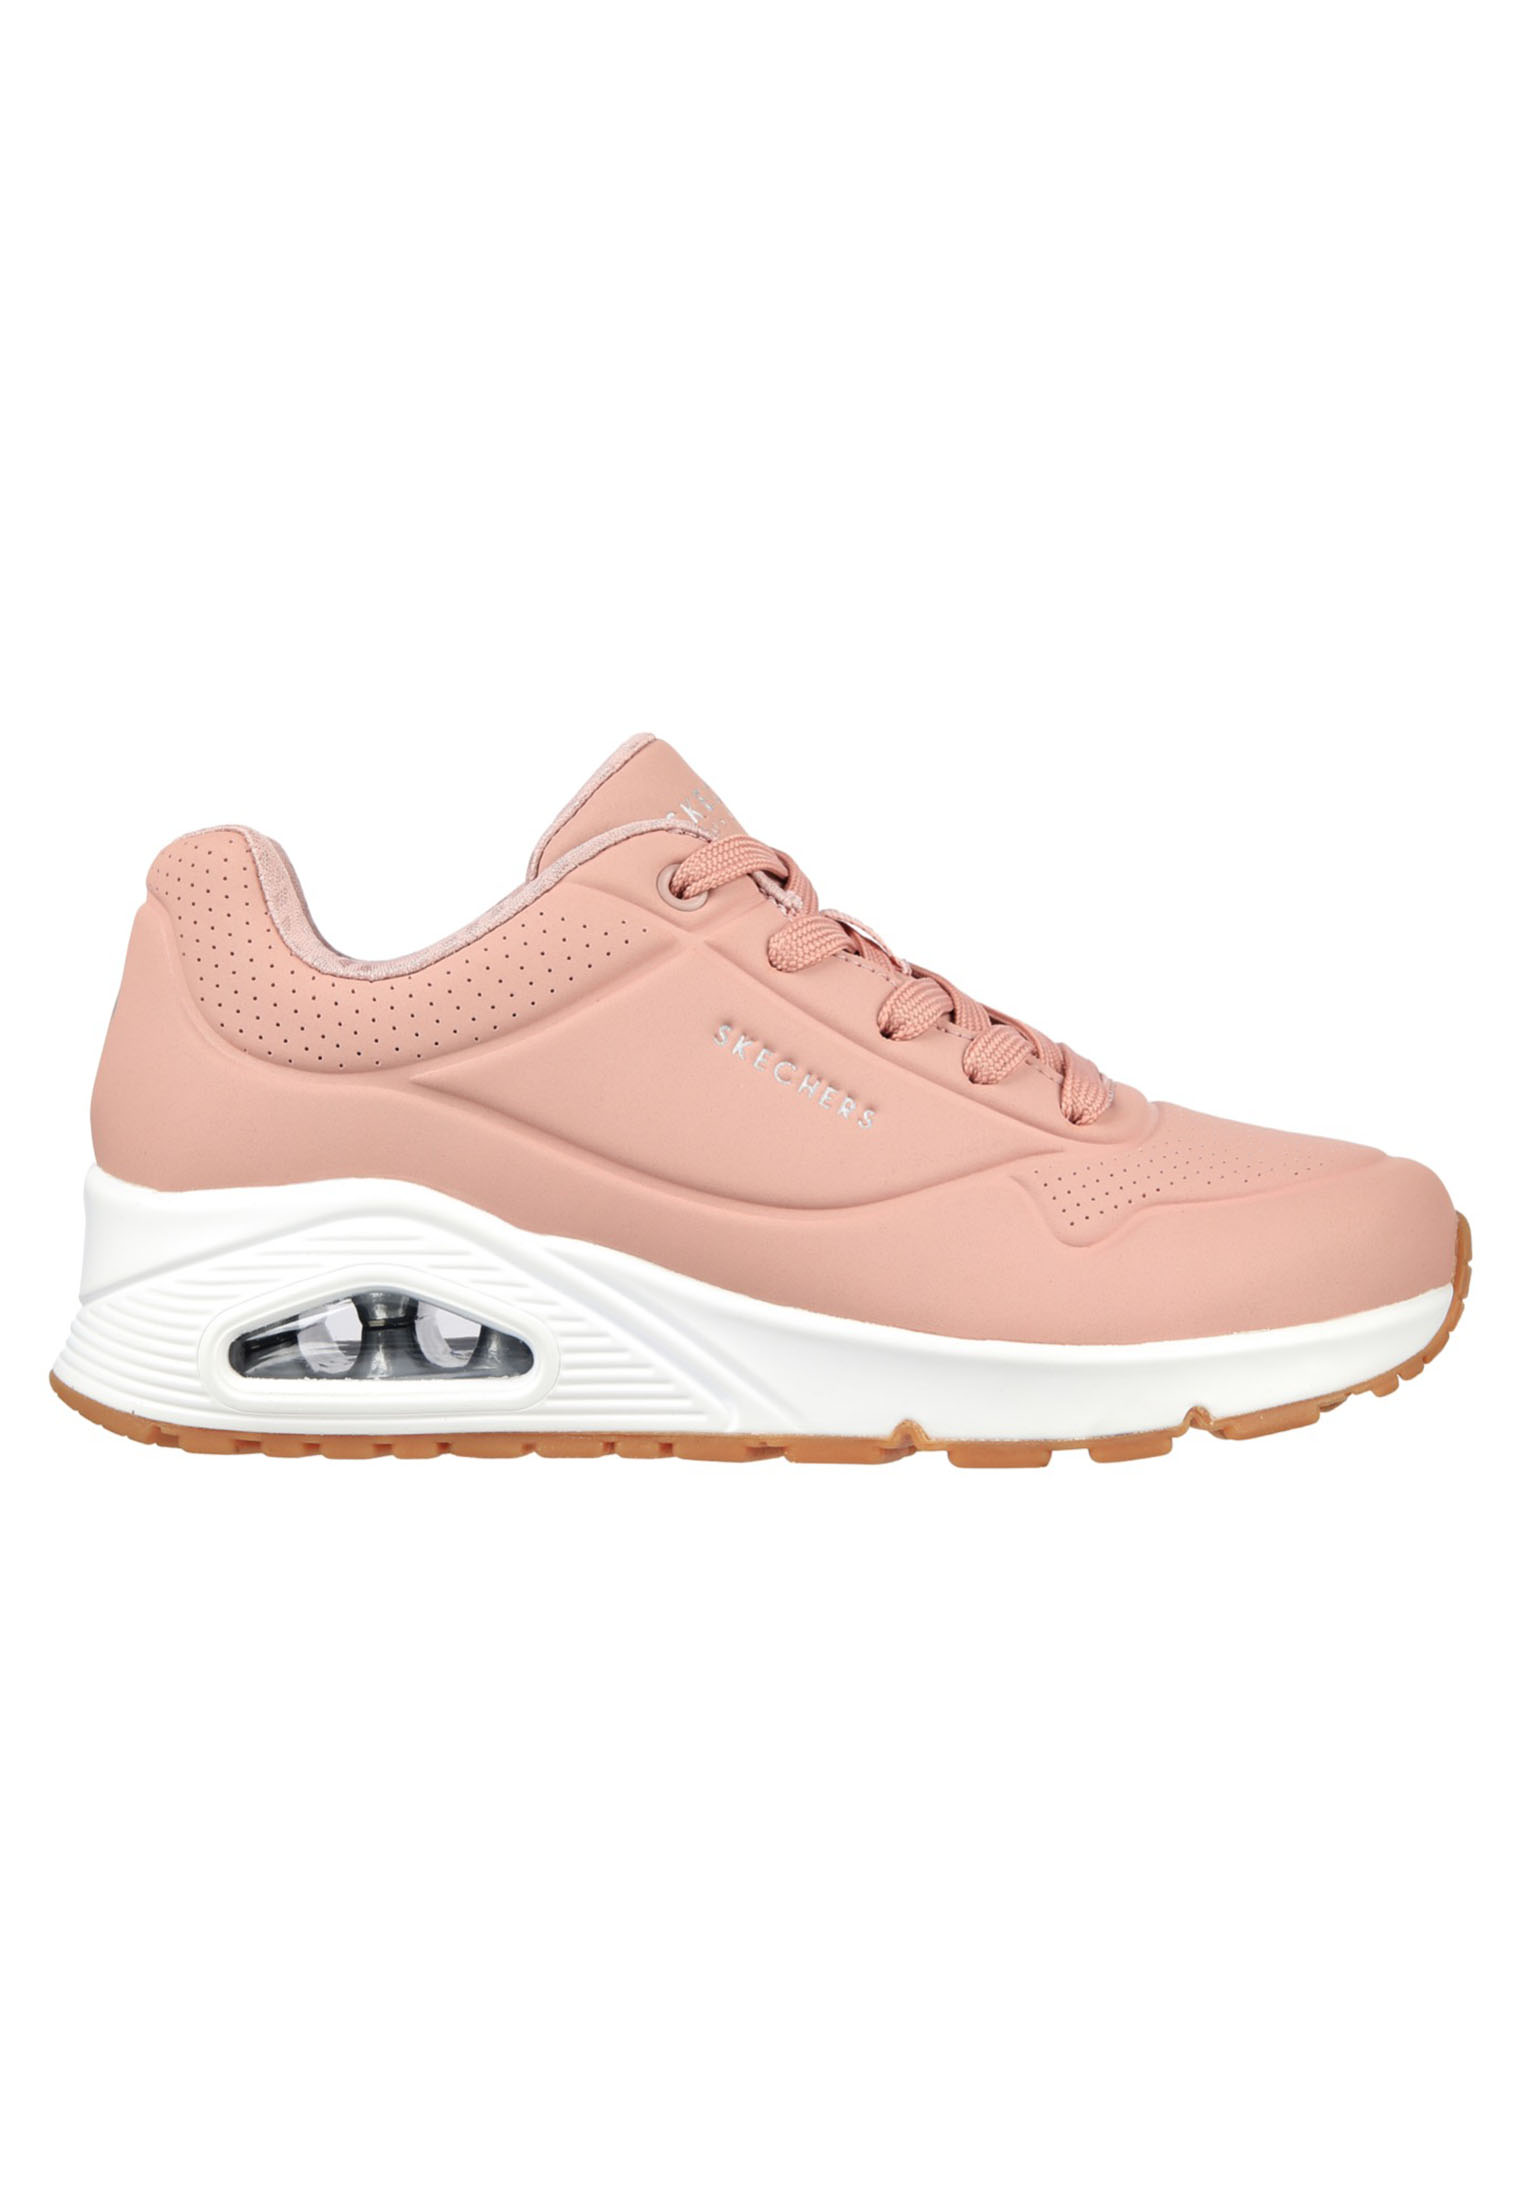 Skechers Uno Stand On Air 73690/BLSH Roze-36 maat 36